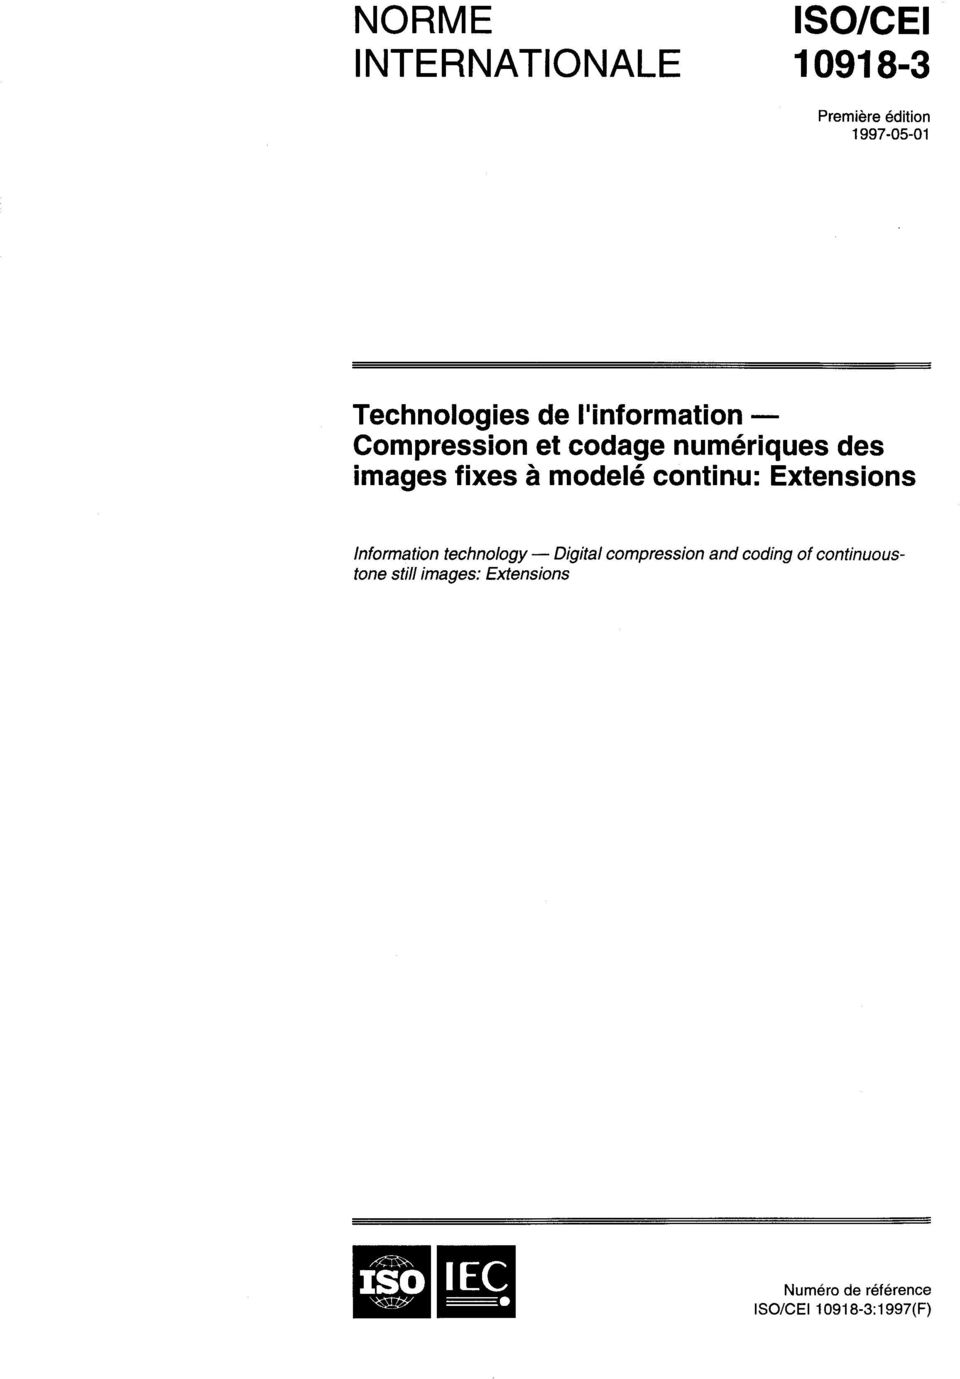 continu: Extensions Informa thon technology - Digital compression and coding of